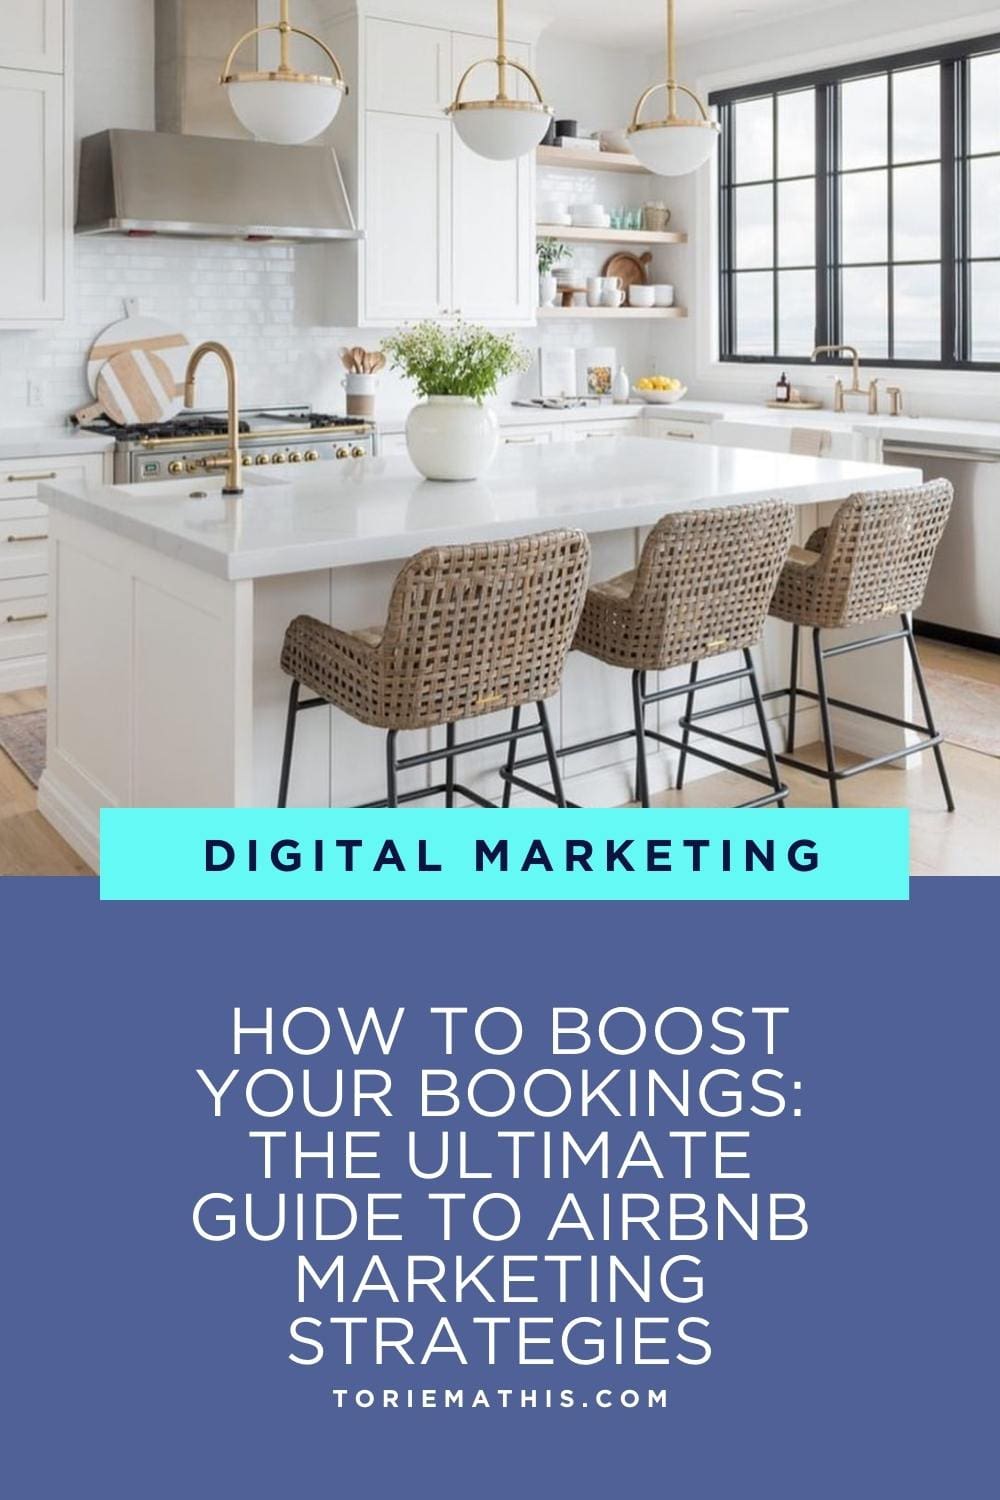 Boost Your Bookings The Ultimate Guide to Airbnb Marketing Strategies